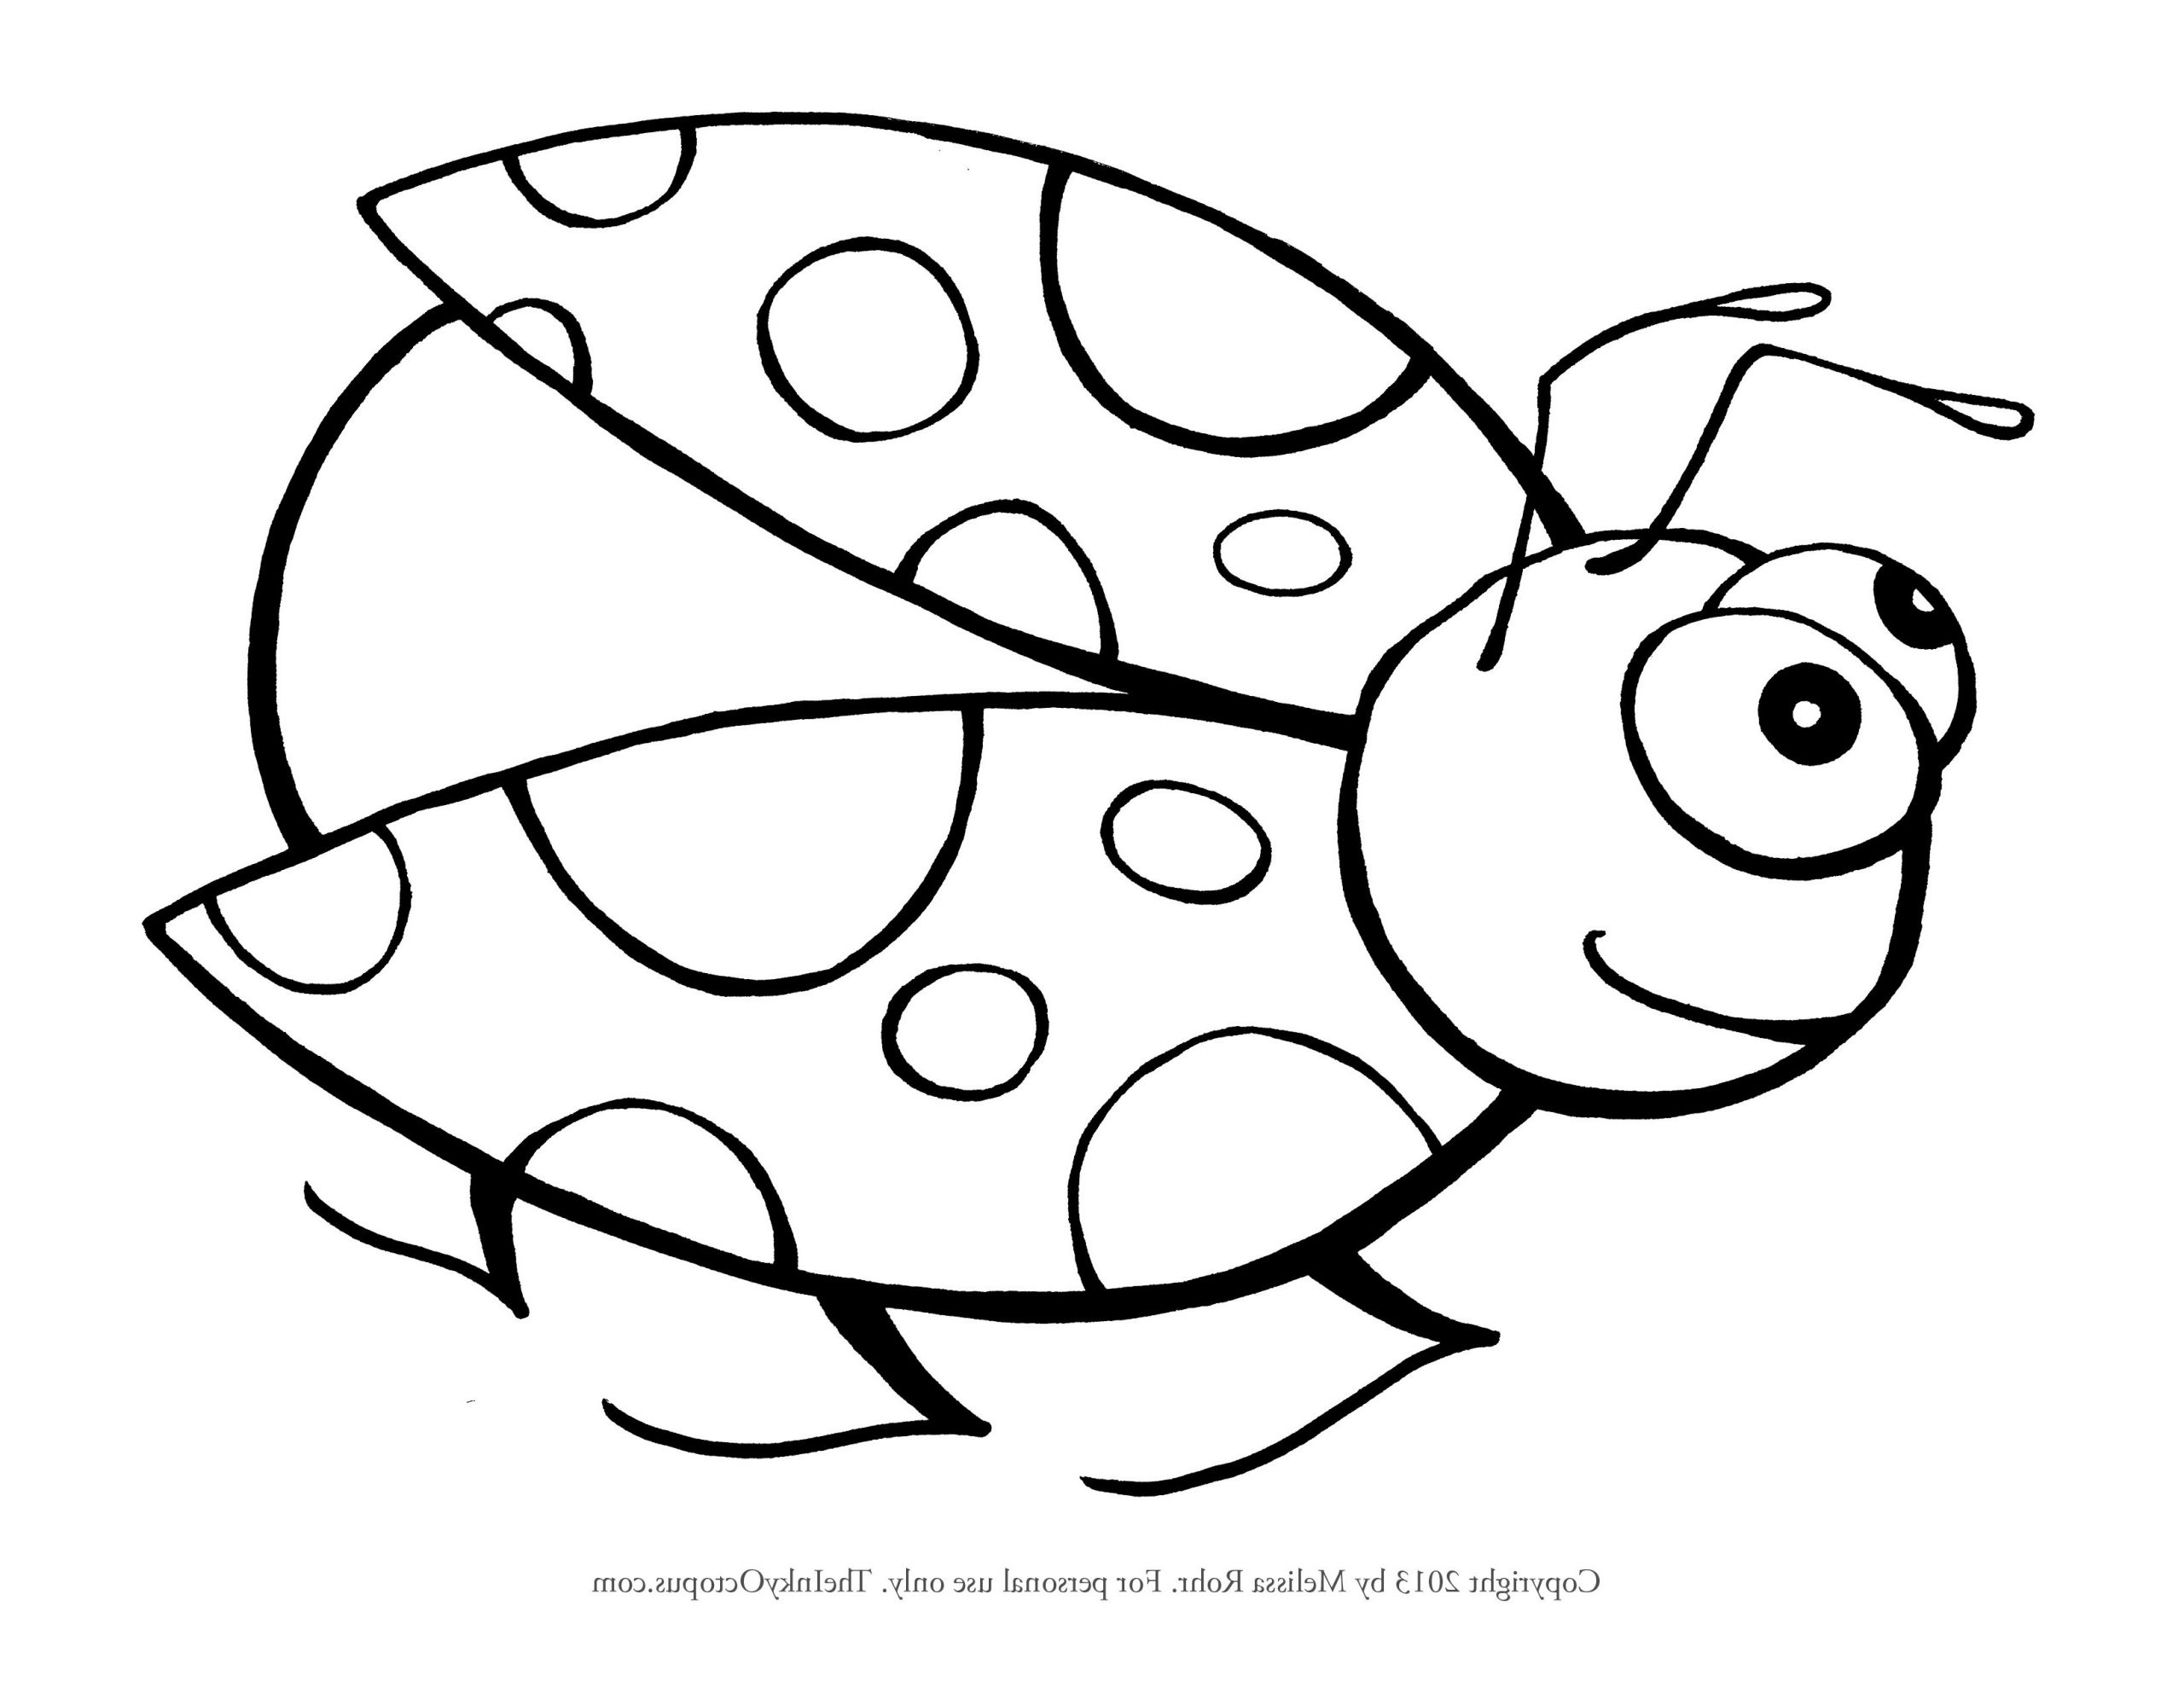 Ladybug Coloring Pages For Kids
 Ladybug Drawing at GetDrawings